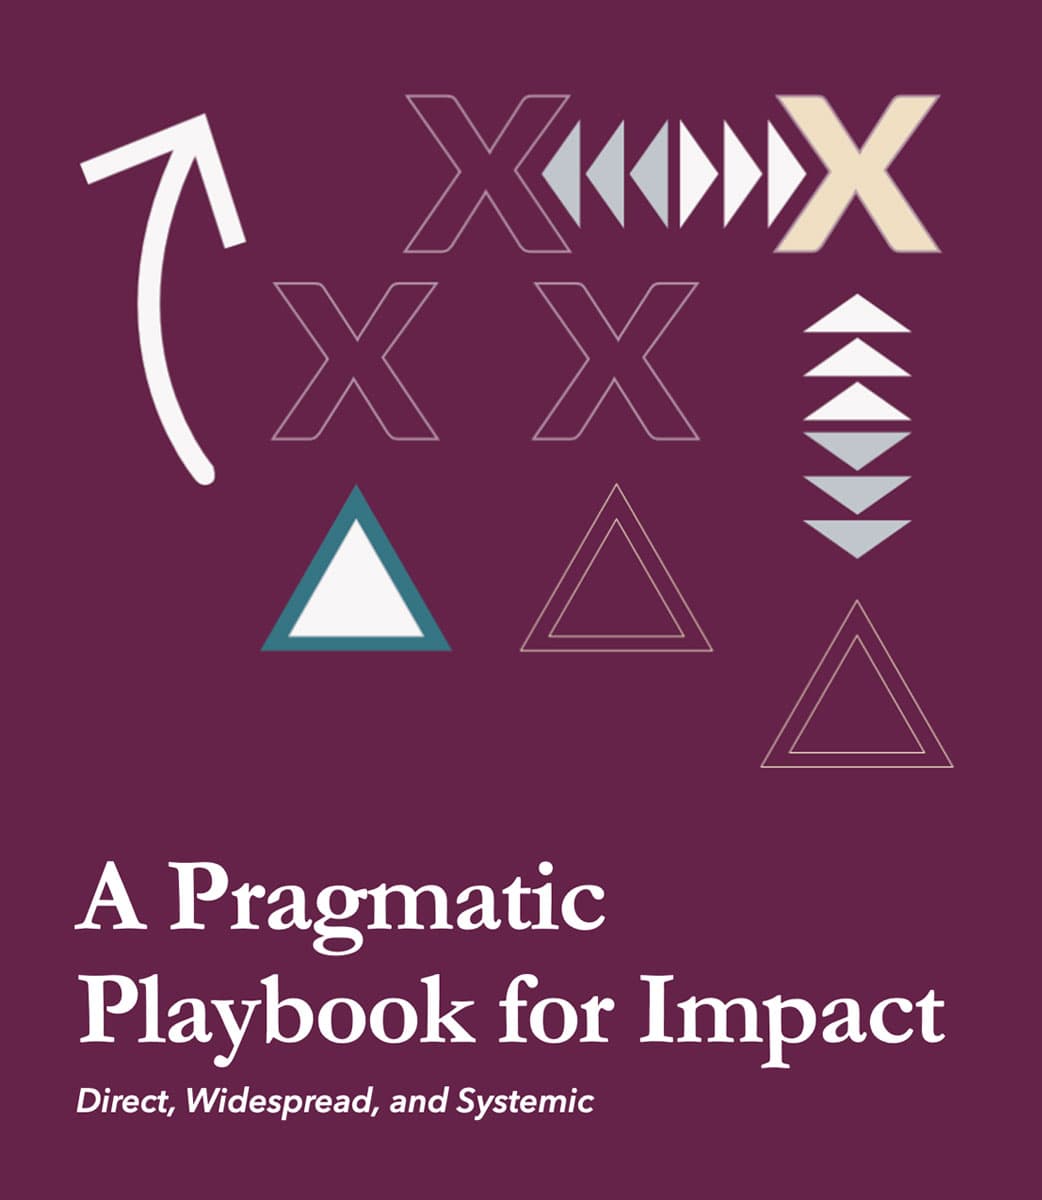 A Pragmatic Playbook for Impact: Overview Slide Presentation